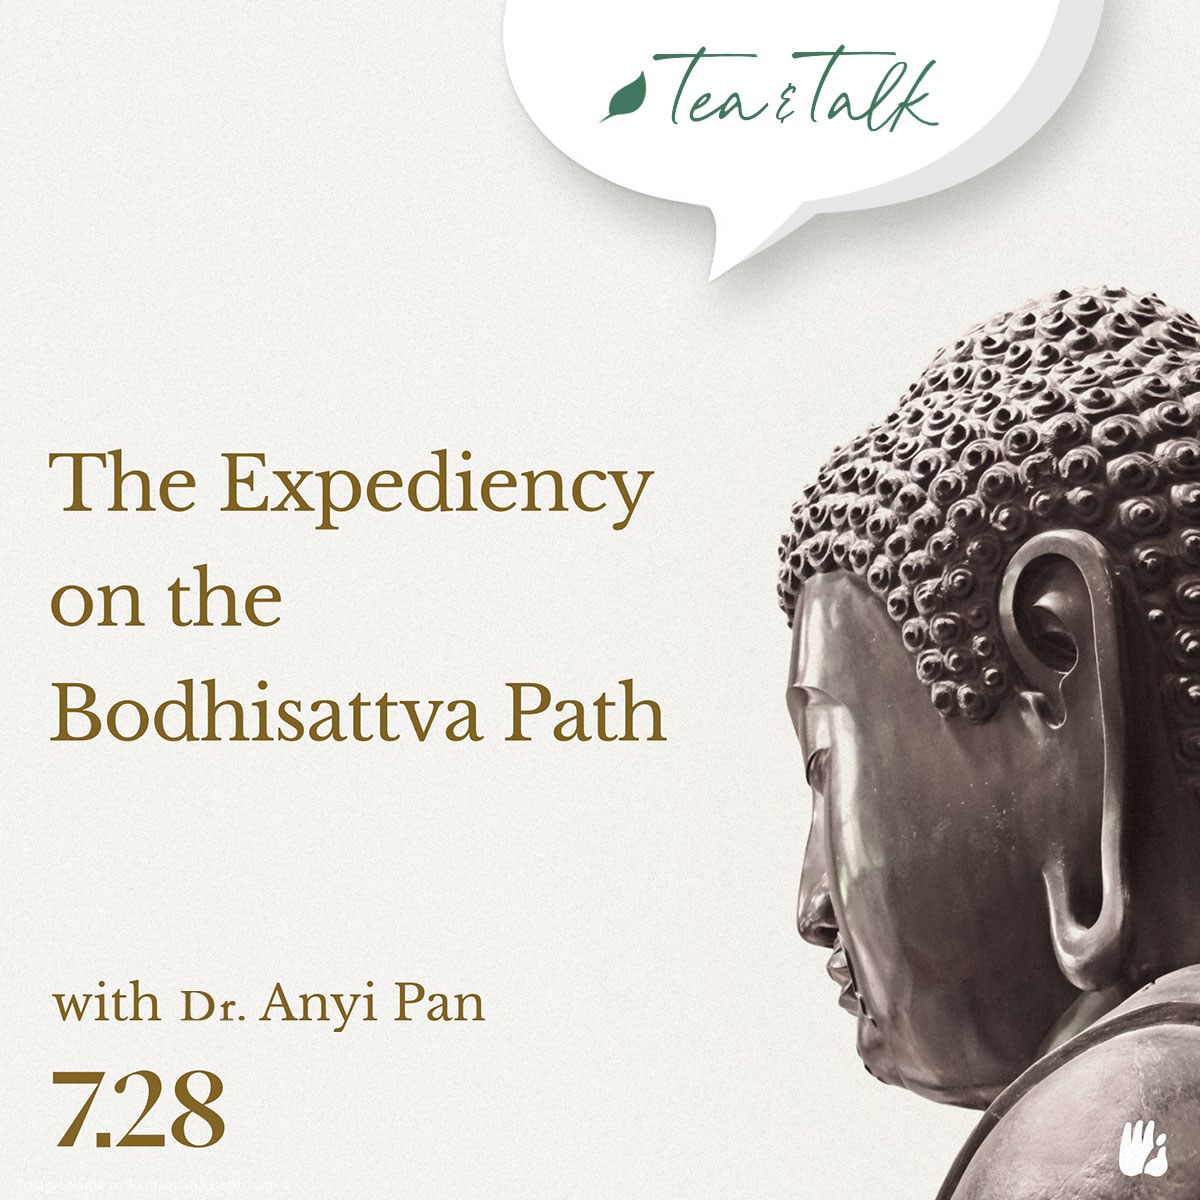 -The Expediency on the Bodhisattva Path